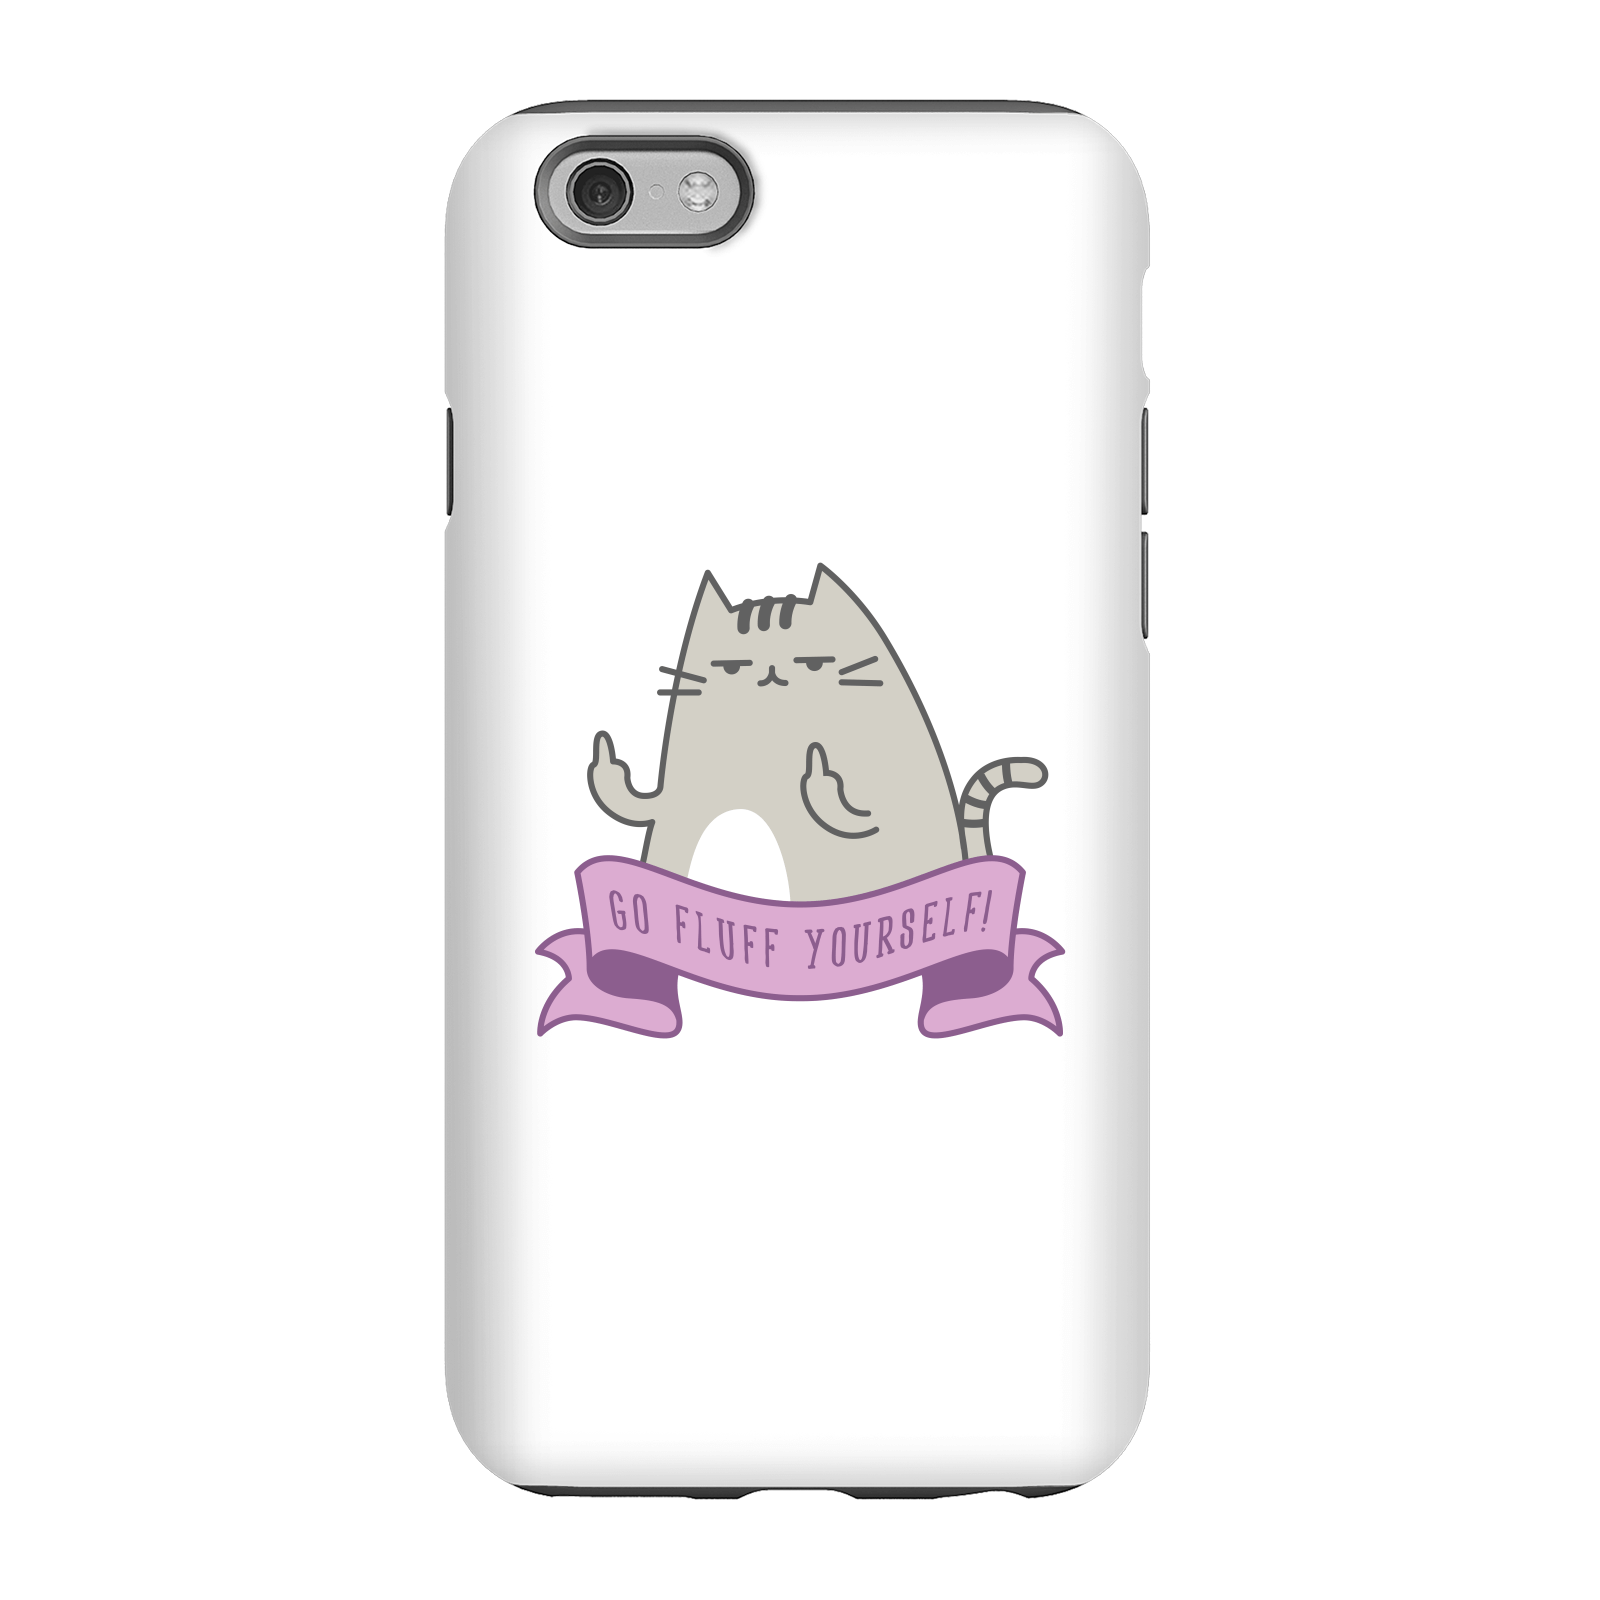 Go Fluff Yourself! Phone Case for iPhone and Android - iPhone 6 - Tough Case - Matte